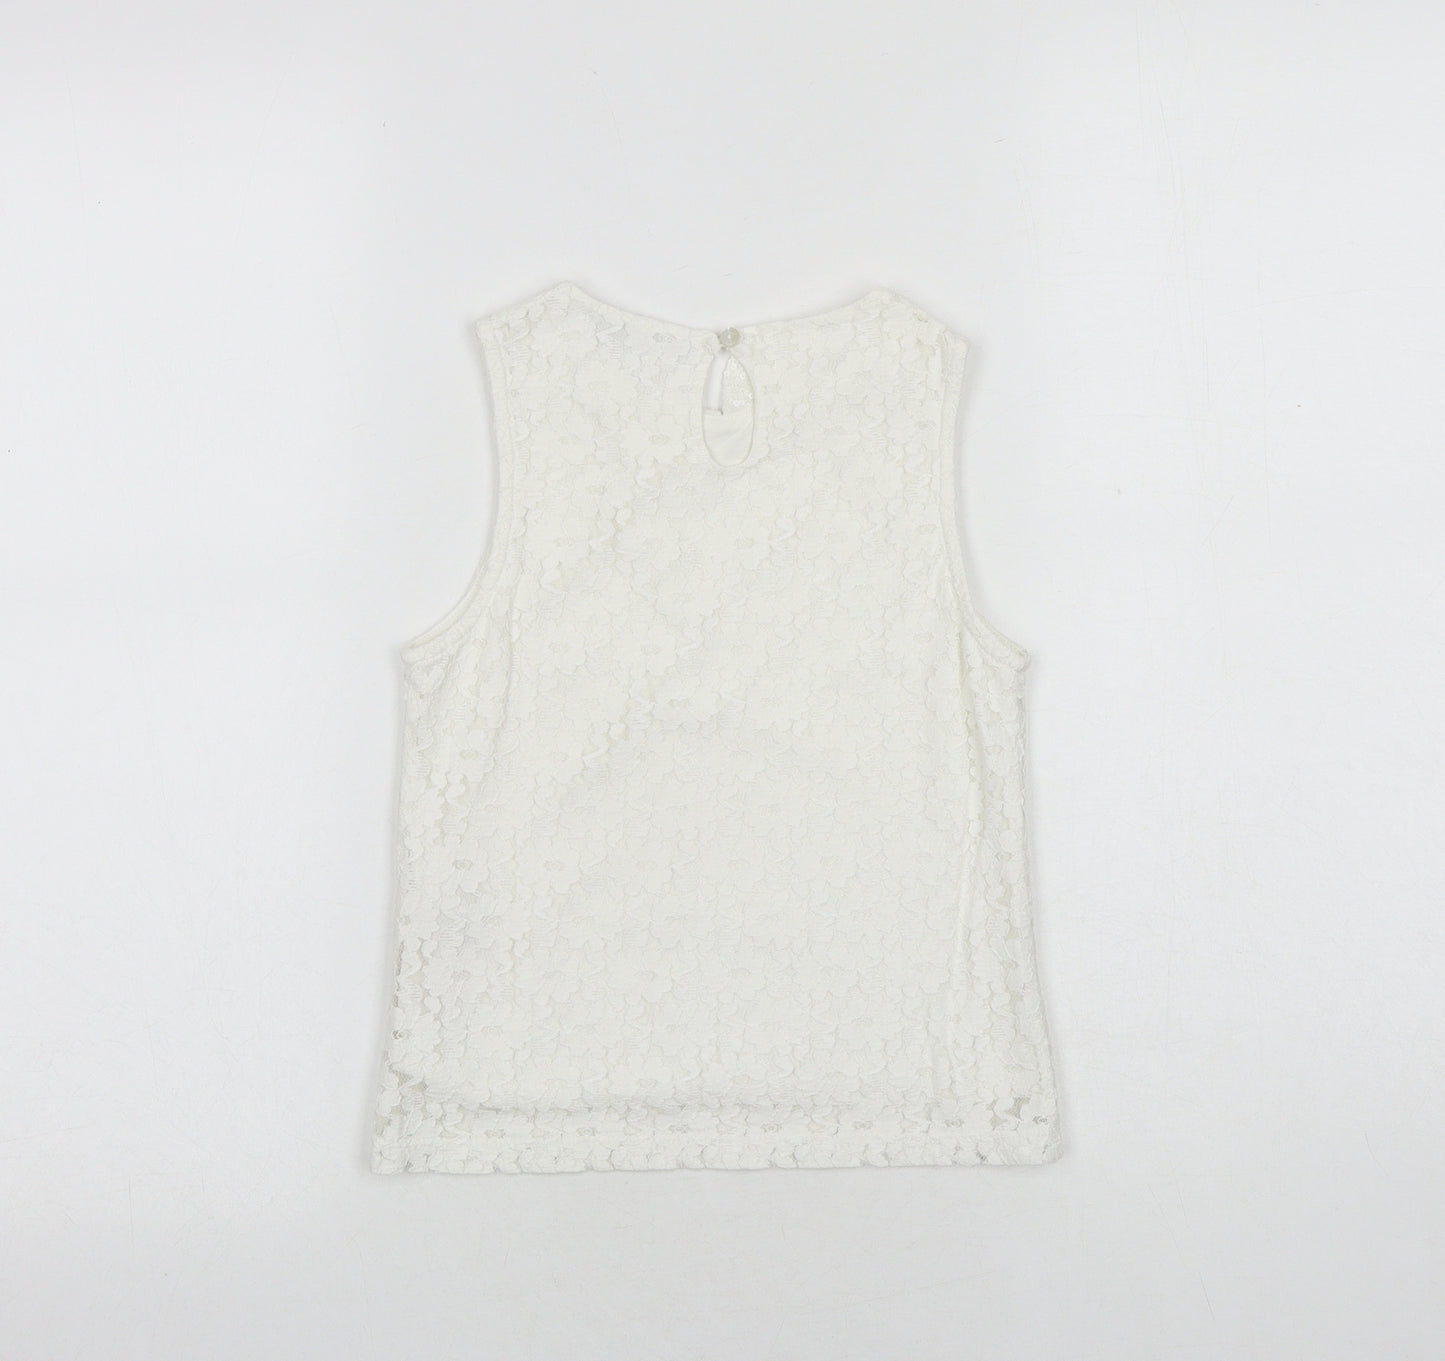 Marks and Spencer Girls White Cotton Basic Tank Size 7-8 Years Collared Button